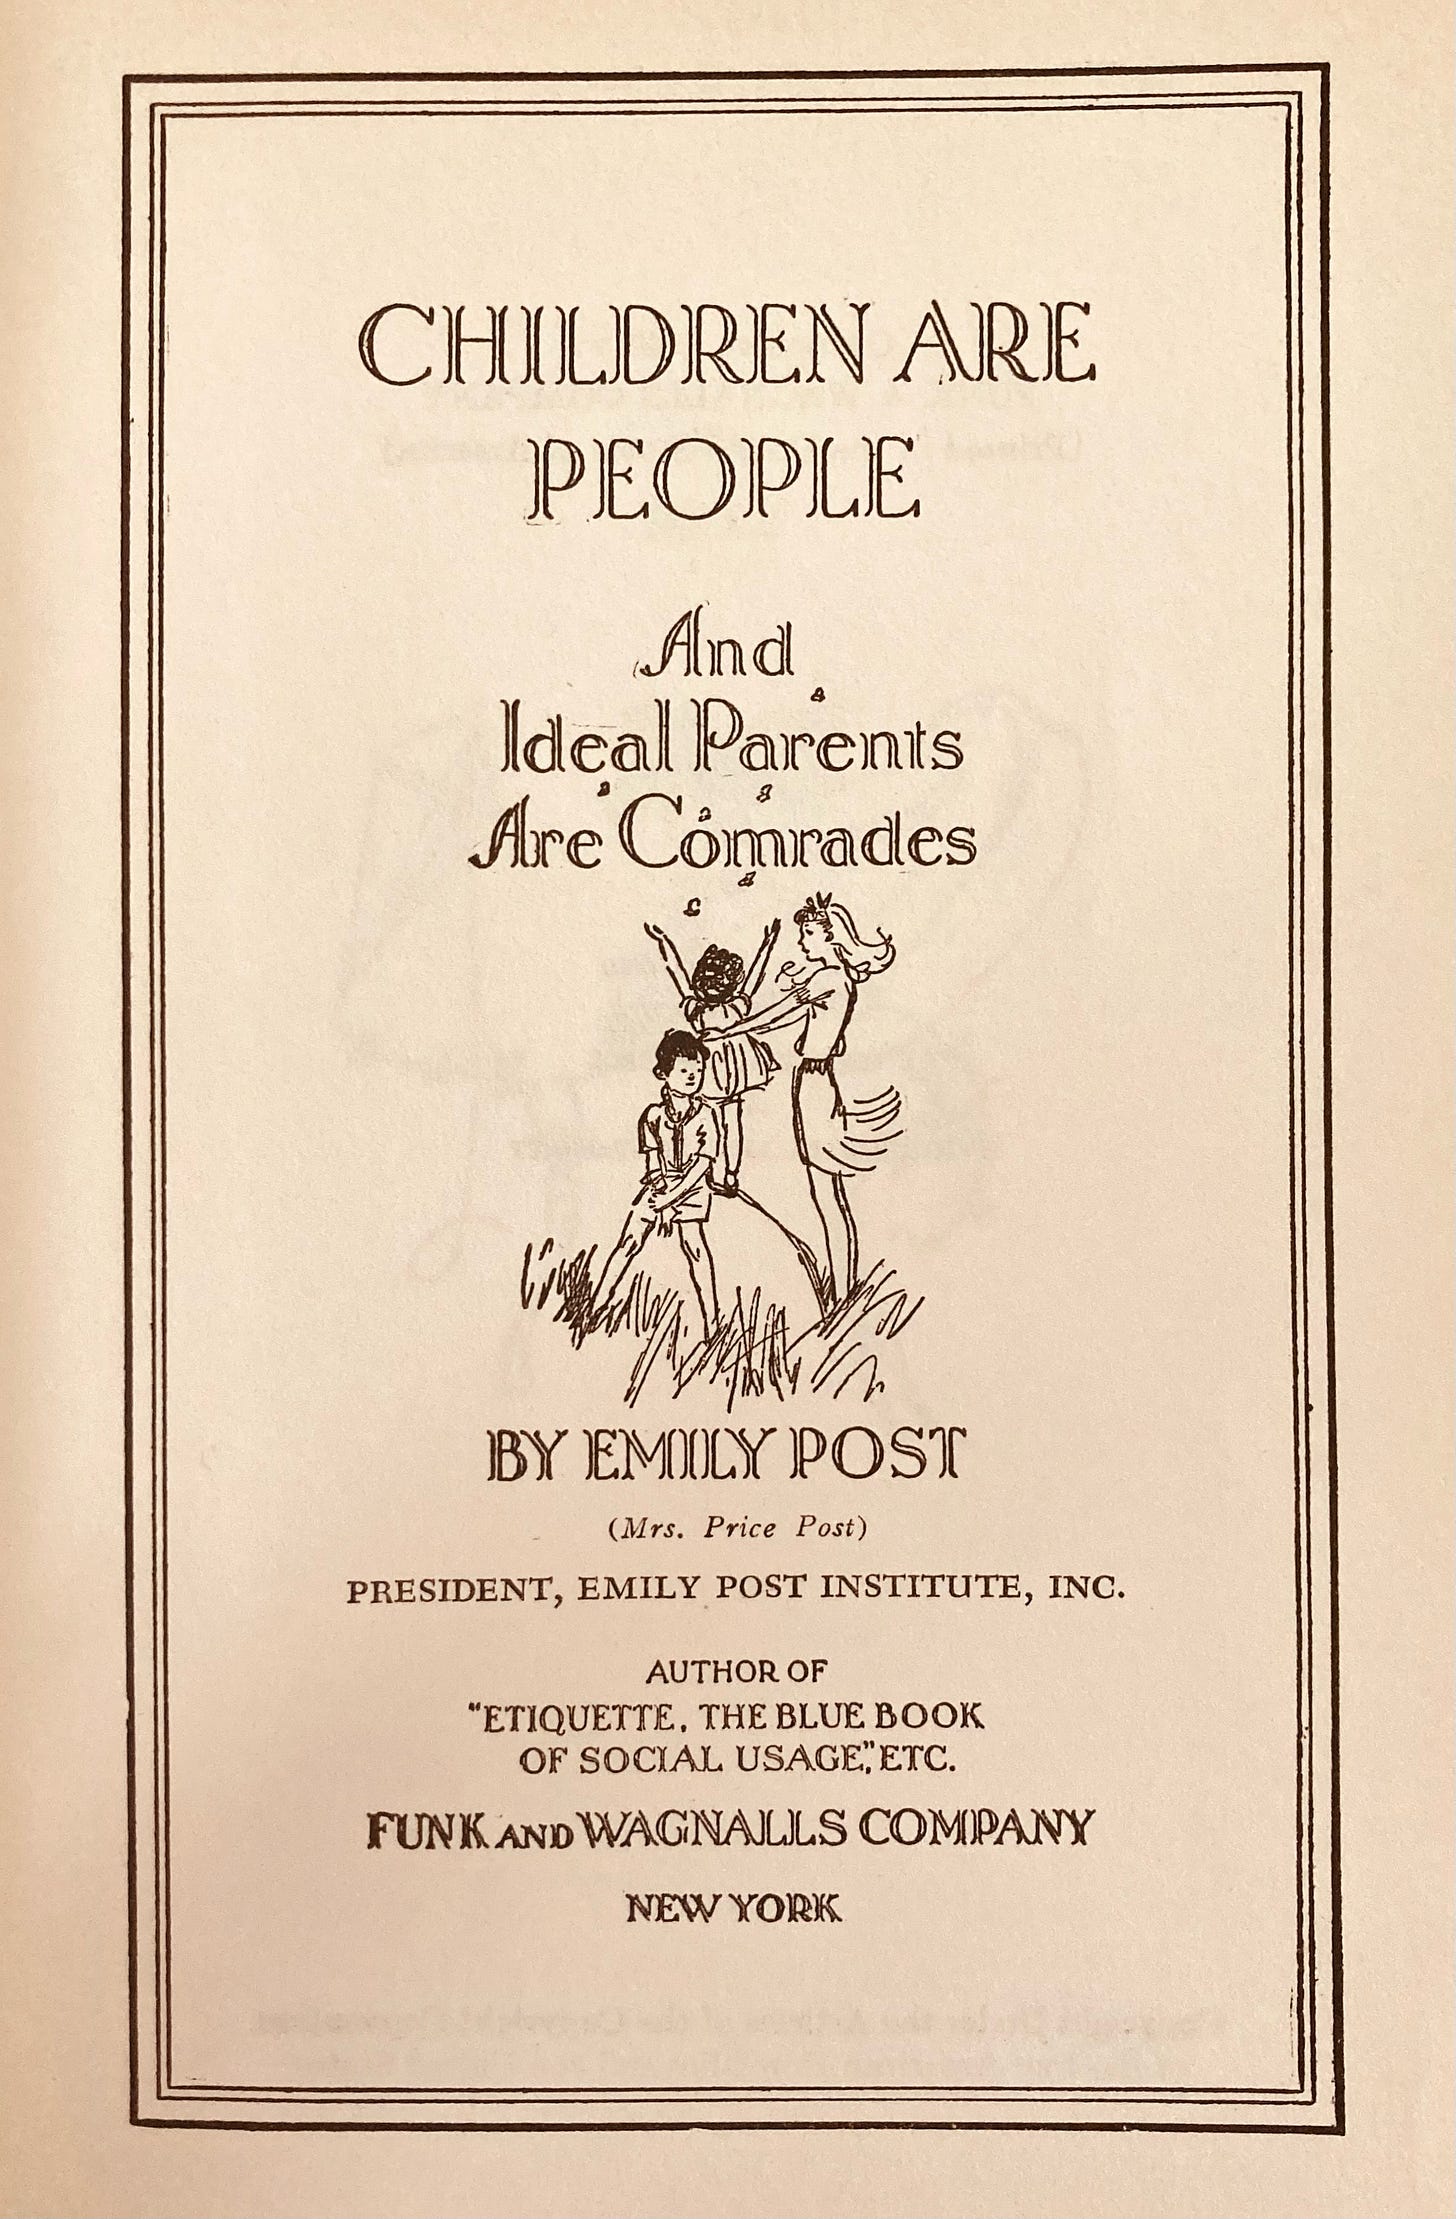 Interrior Title Page reads Children Are People And Ideal Parents Are Comrades By Emily Post (Mrs. Price Post) President, Emily Post Institute, Inc. Author of "Etiquette, The Blue Book of Social Usage" etc. Funk and Wagnalls Company New York with an illustration of two children and either their mother, solder sibling or babysitter all playing on a rock in a field